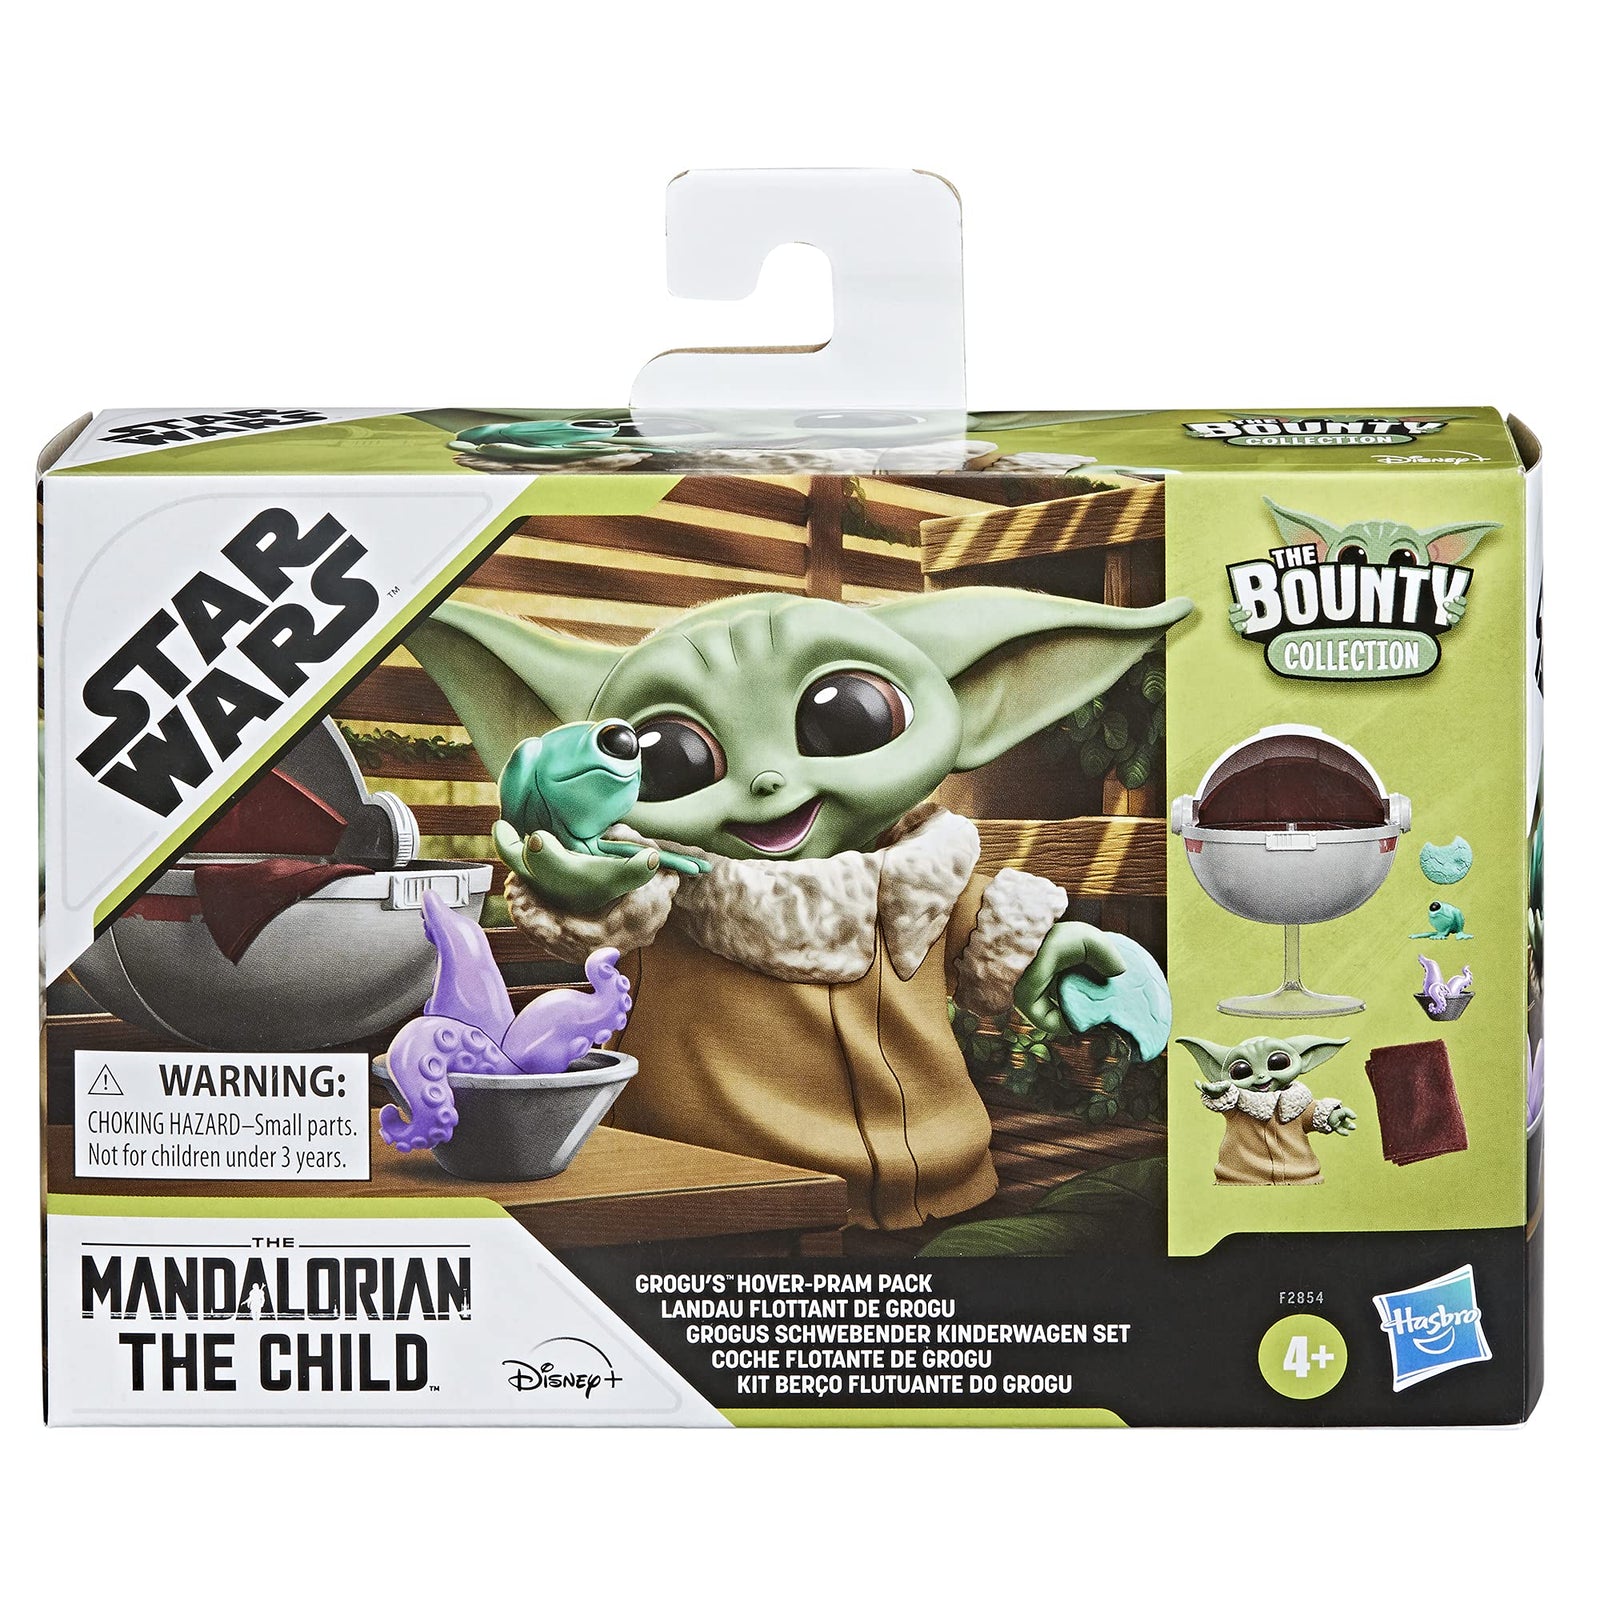 Star Wars The Bounty Collection Grogu’s Hover-Pram Pack The Child Collectible 2.25-Inch-Scale Figure with Accessories, Kids Ages 4 and Up,Multi-Colored,Standard,F2854